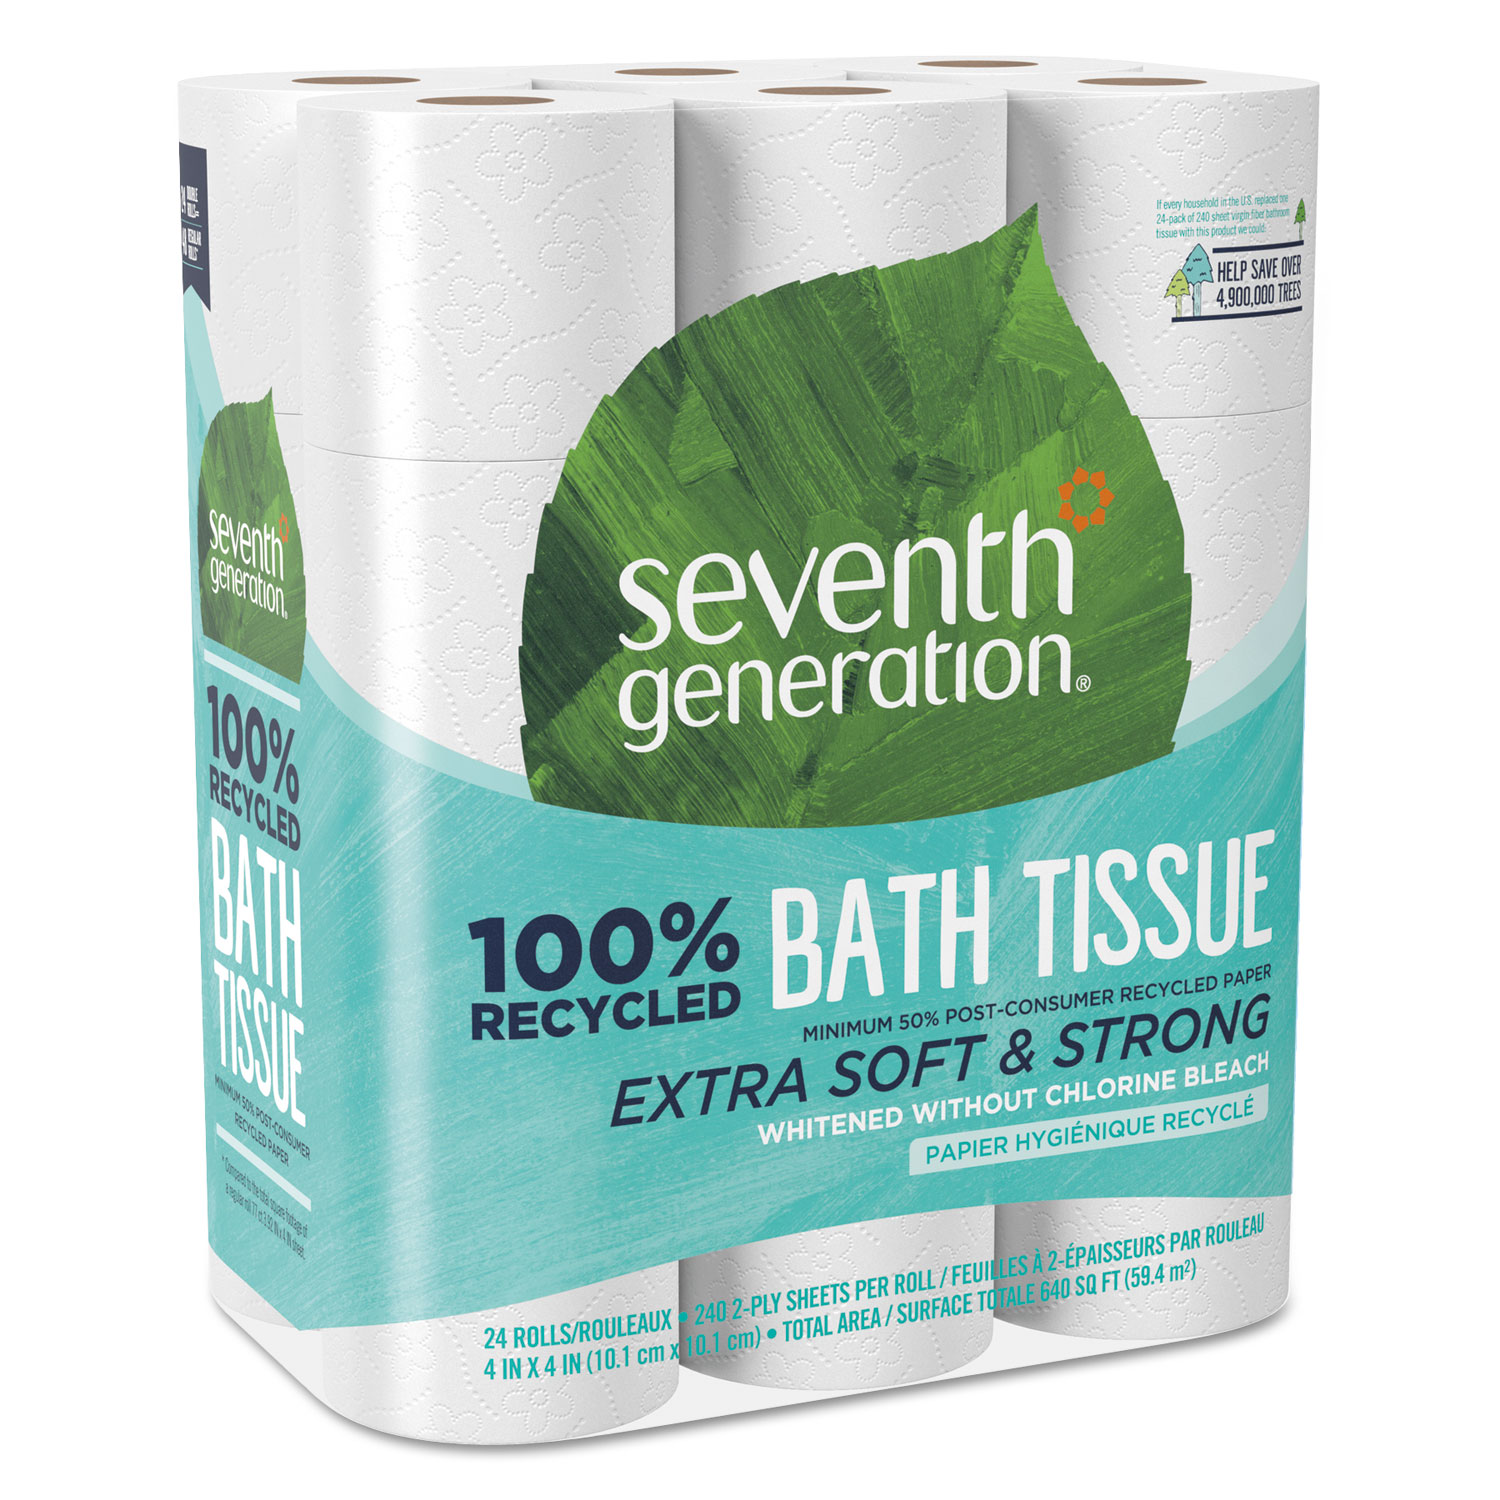  Seventh Generation SEV 13738 100% Recycled Bathroom Tissue, Septic Safe, 2-Ply, White, 240 Sheets/Roll, 24/Pack (SEV13738) 